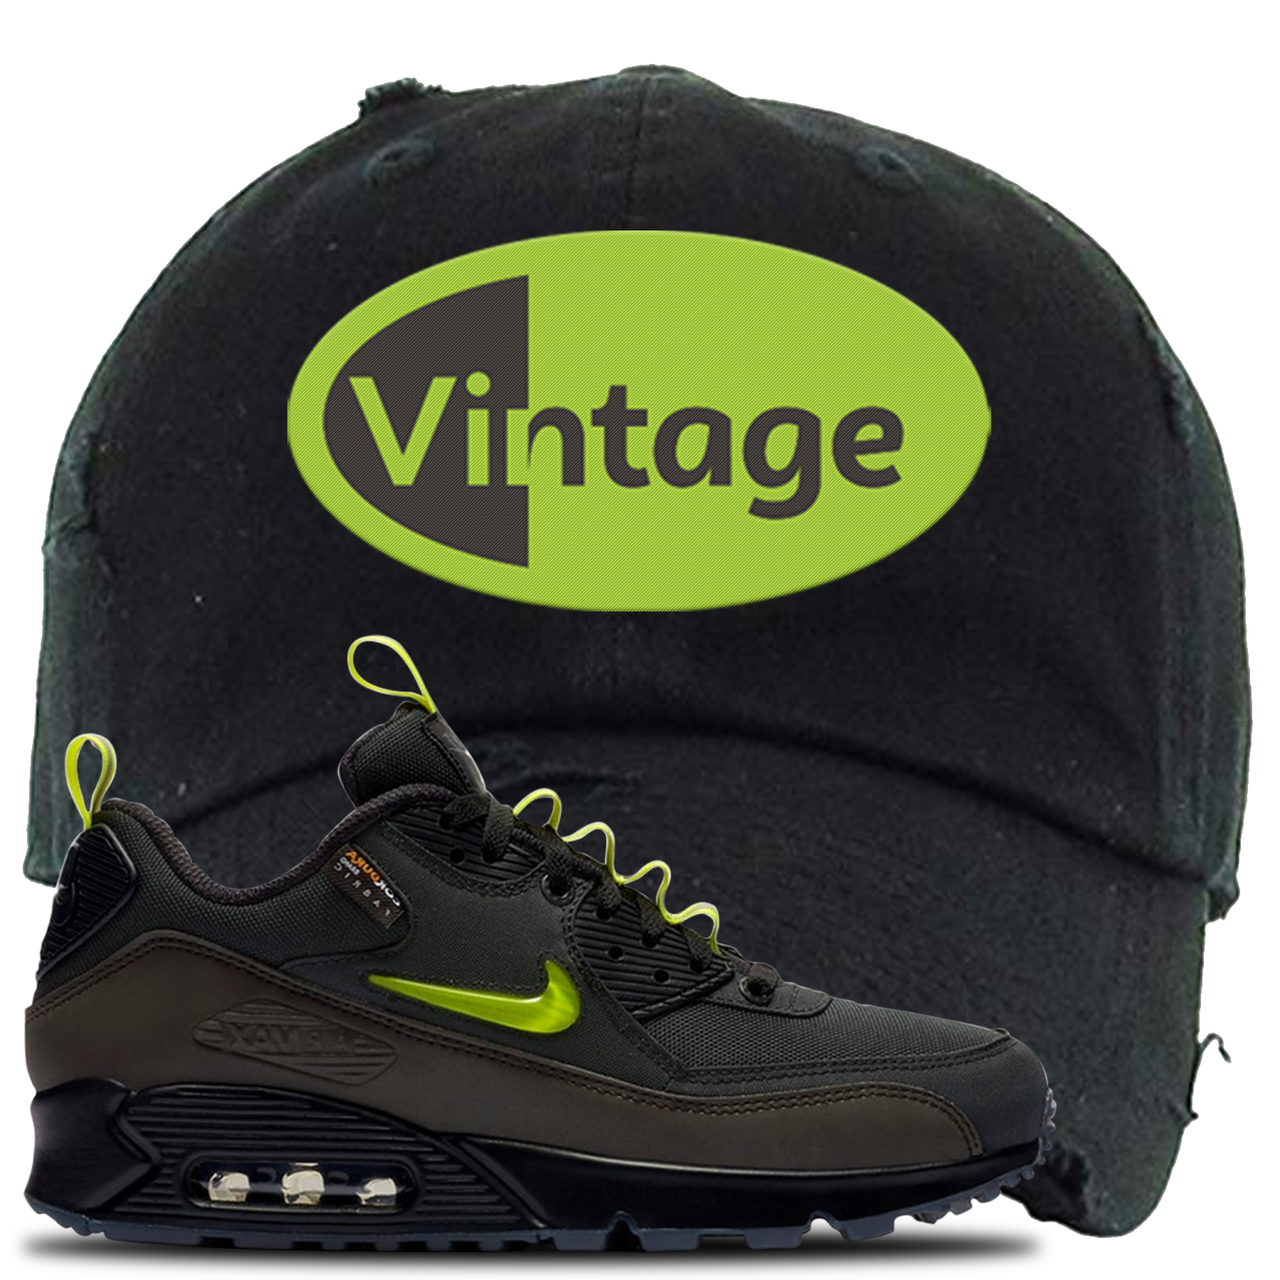 The Basement X Air Max 90 Manchester Vintage Oval Black Sneaker Hook Up Distressed Dad Hat